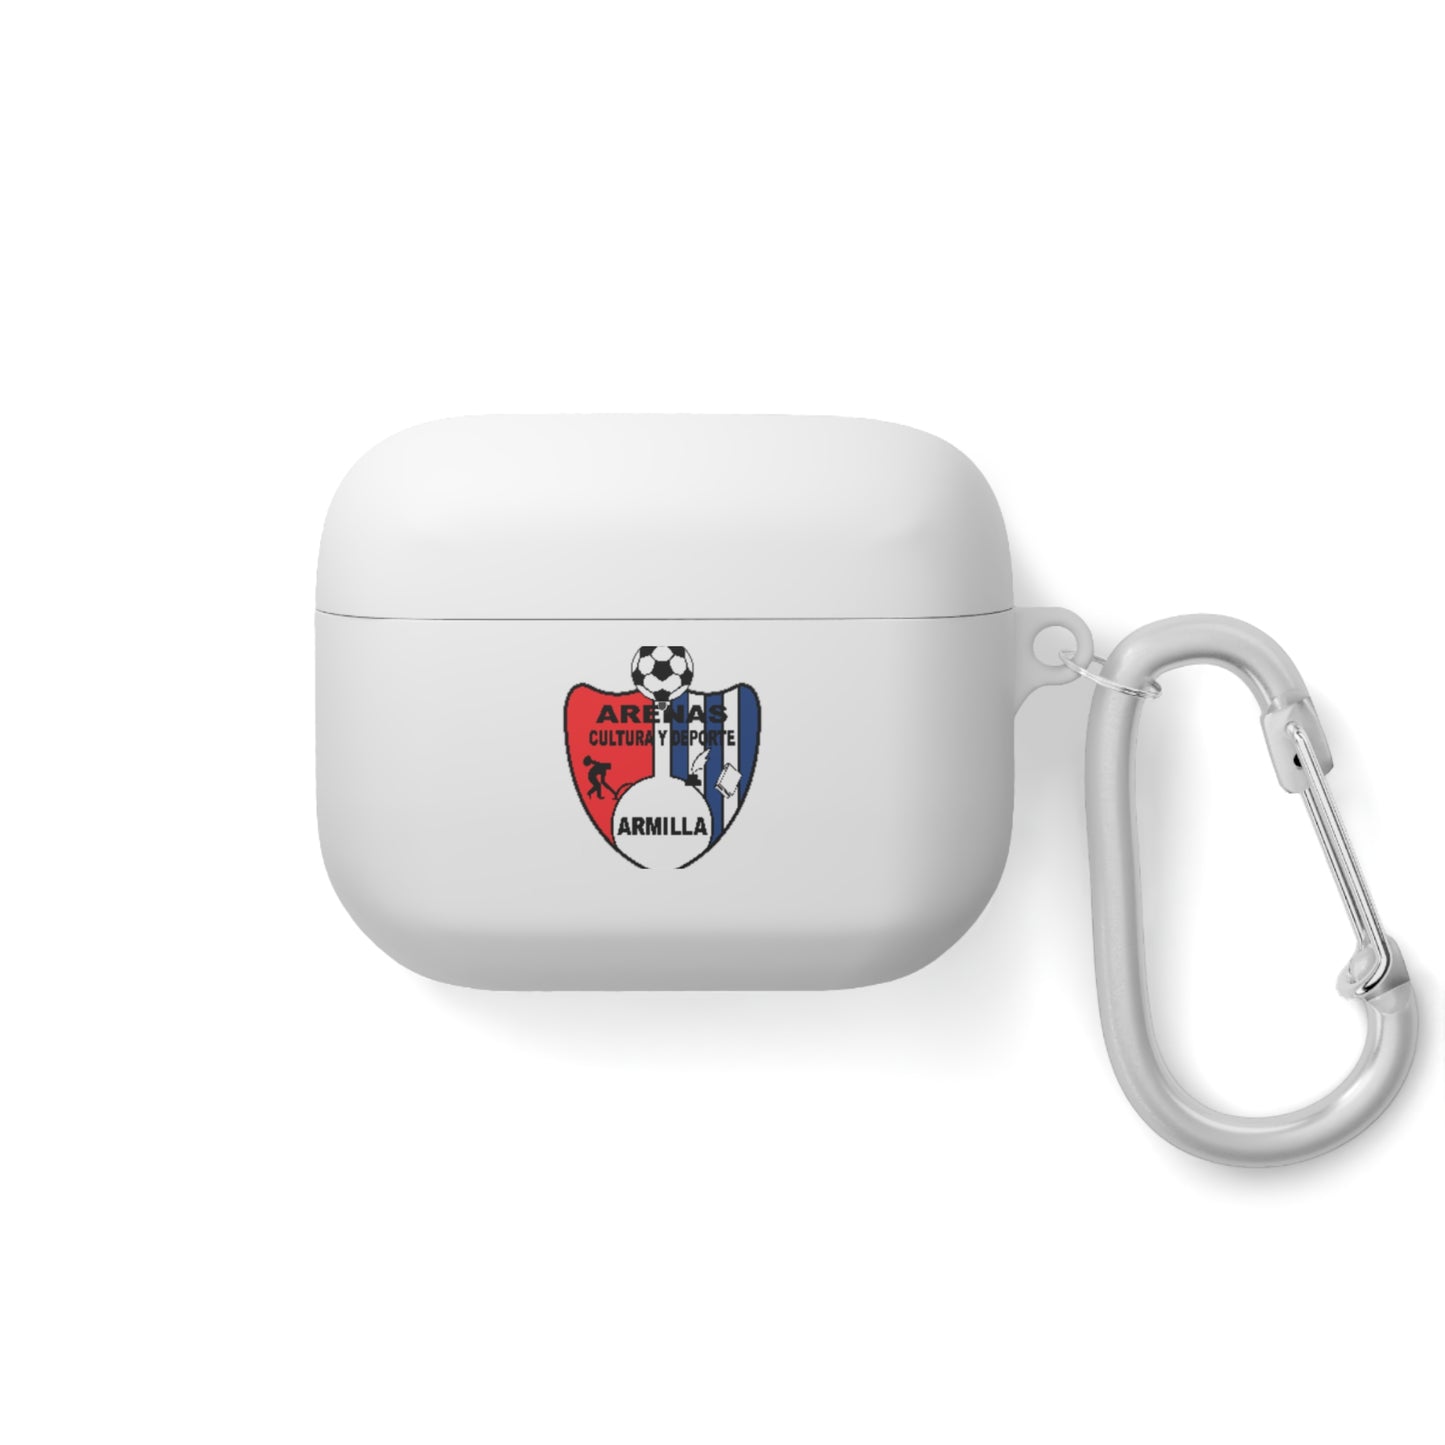 Arenas Cultura y Deporte AirPods and AirPods Pro Case Cover